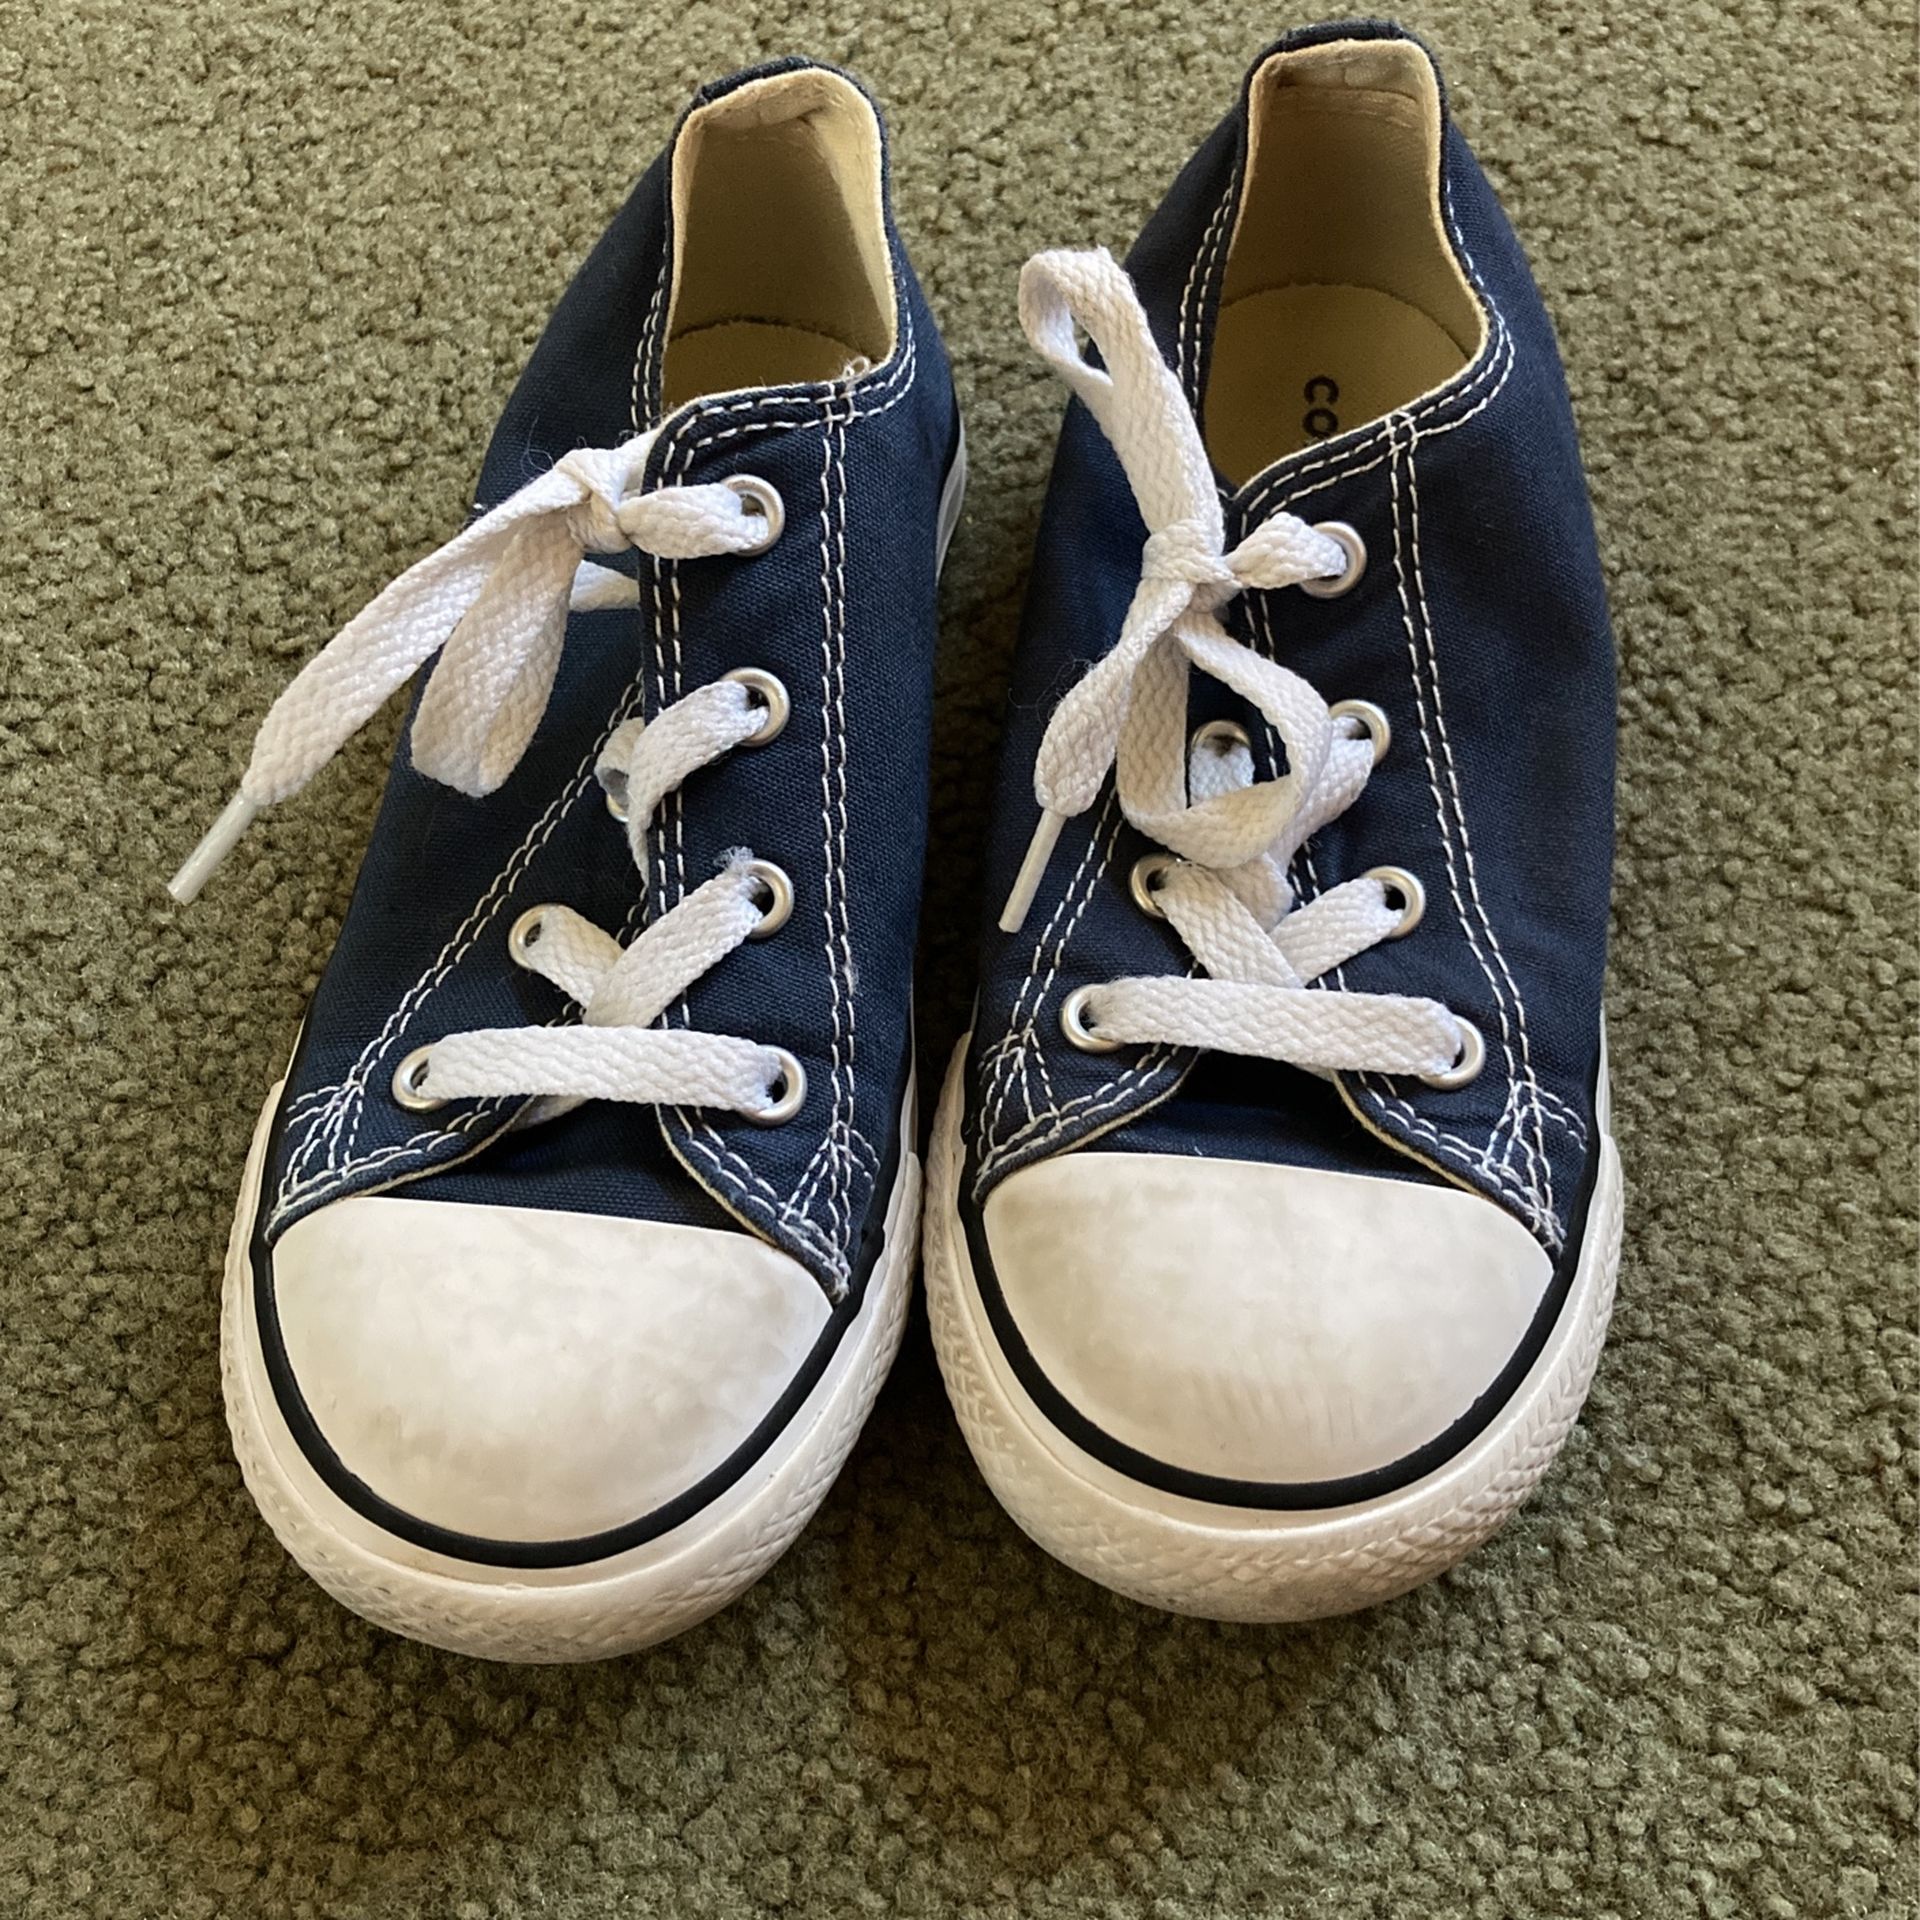 Blue Converse For Boys Size 10